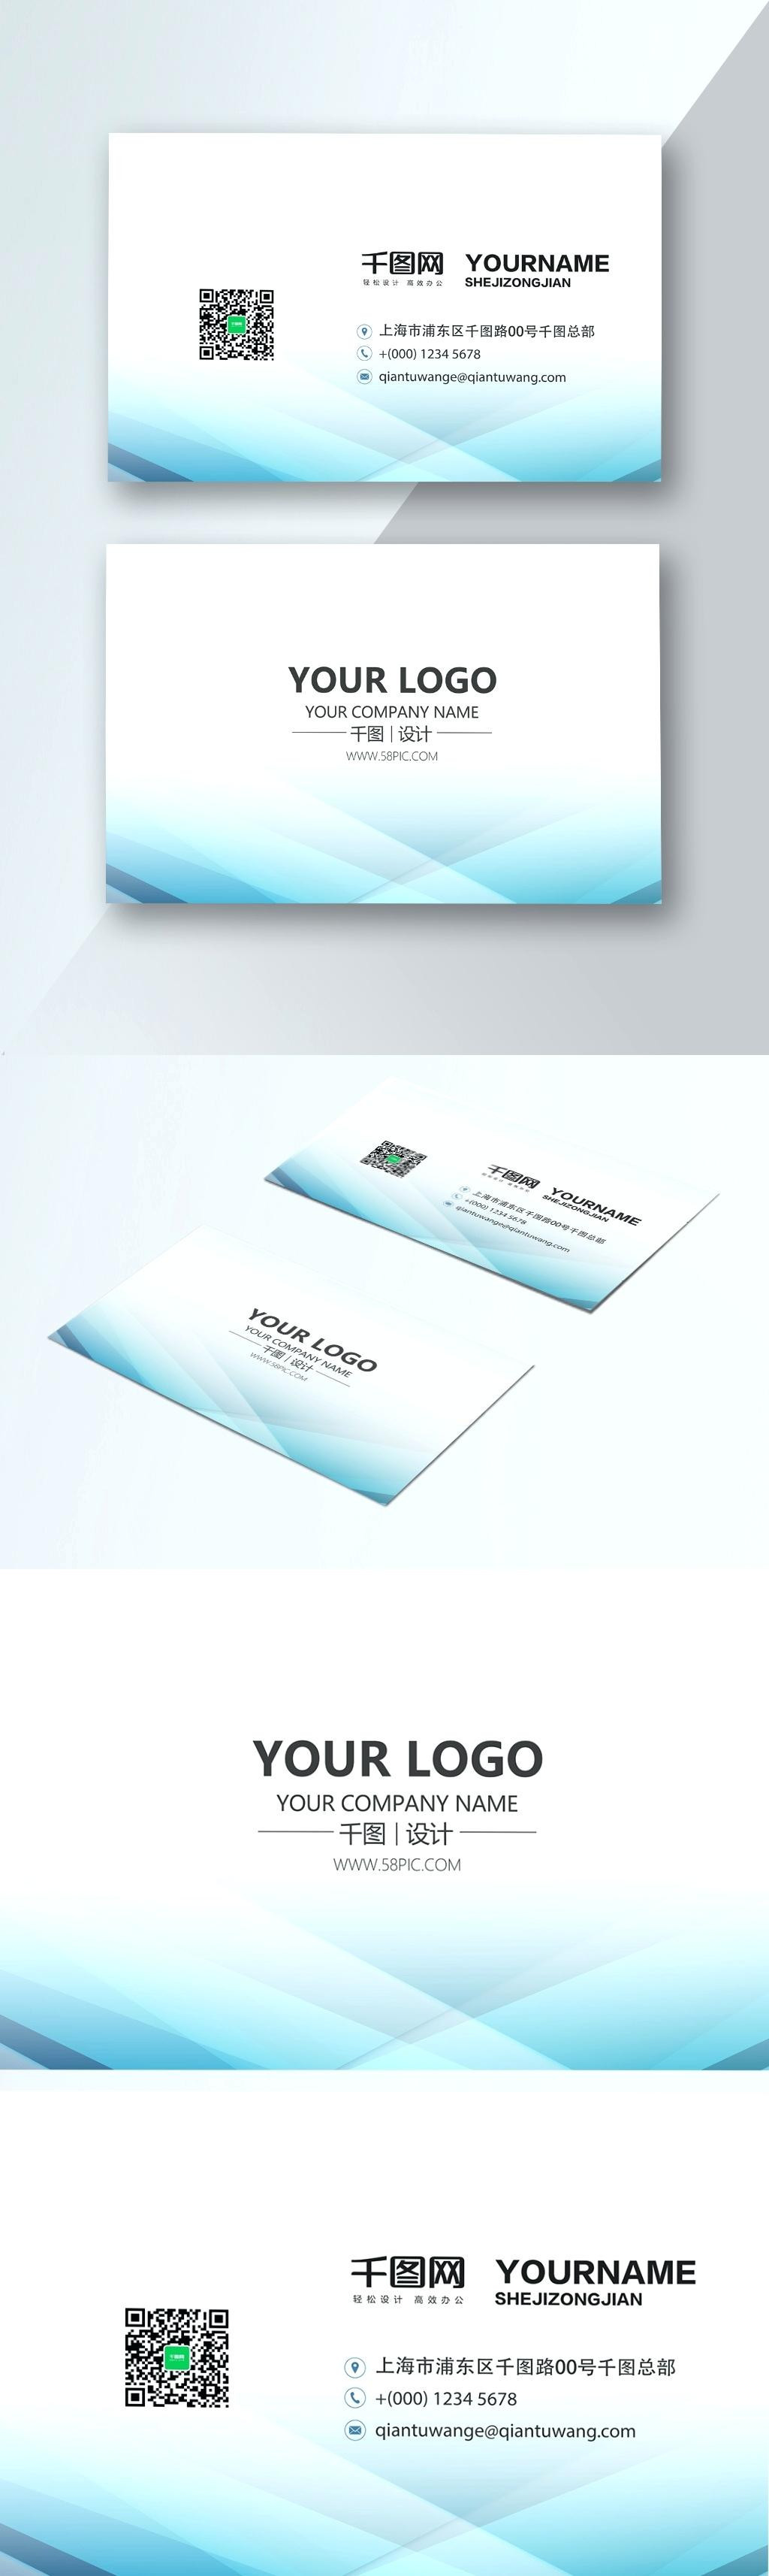 Magnificent Letterhead and Business Card Templates Of Business Card Letterhead Envelope Template